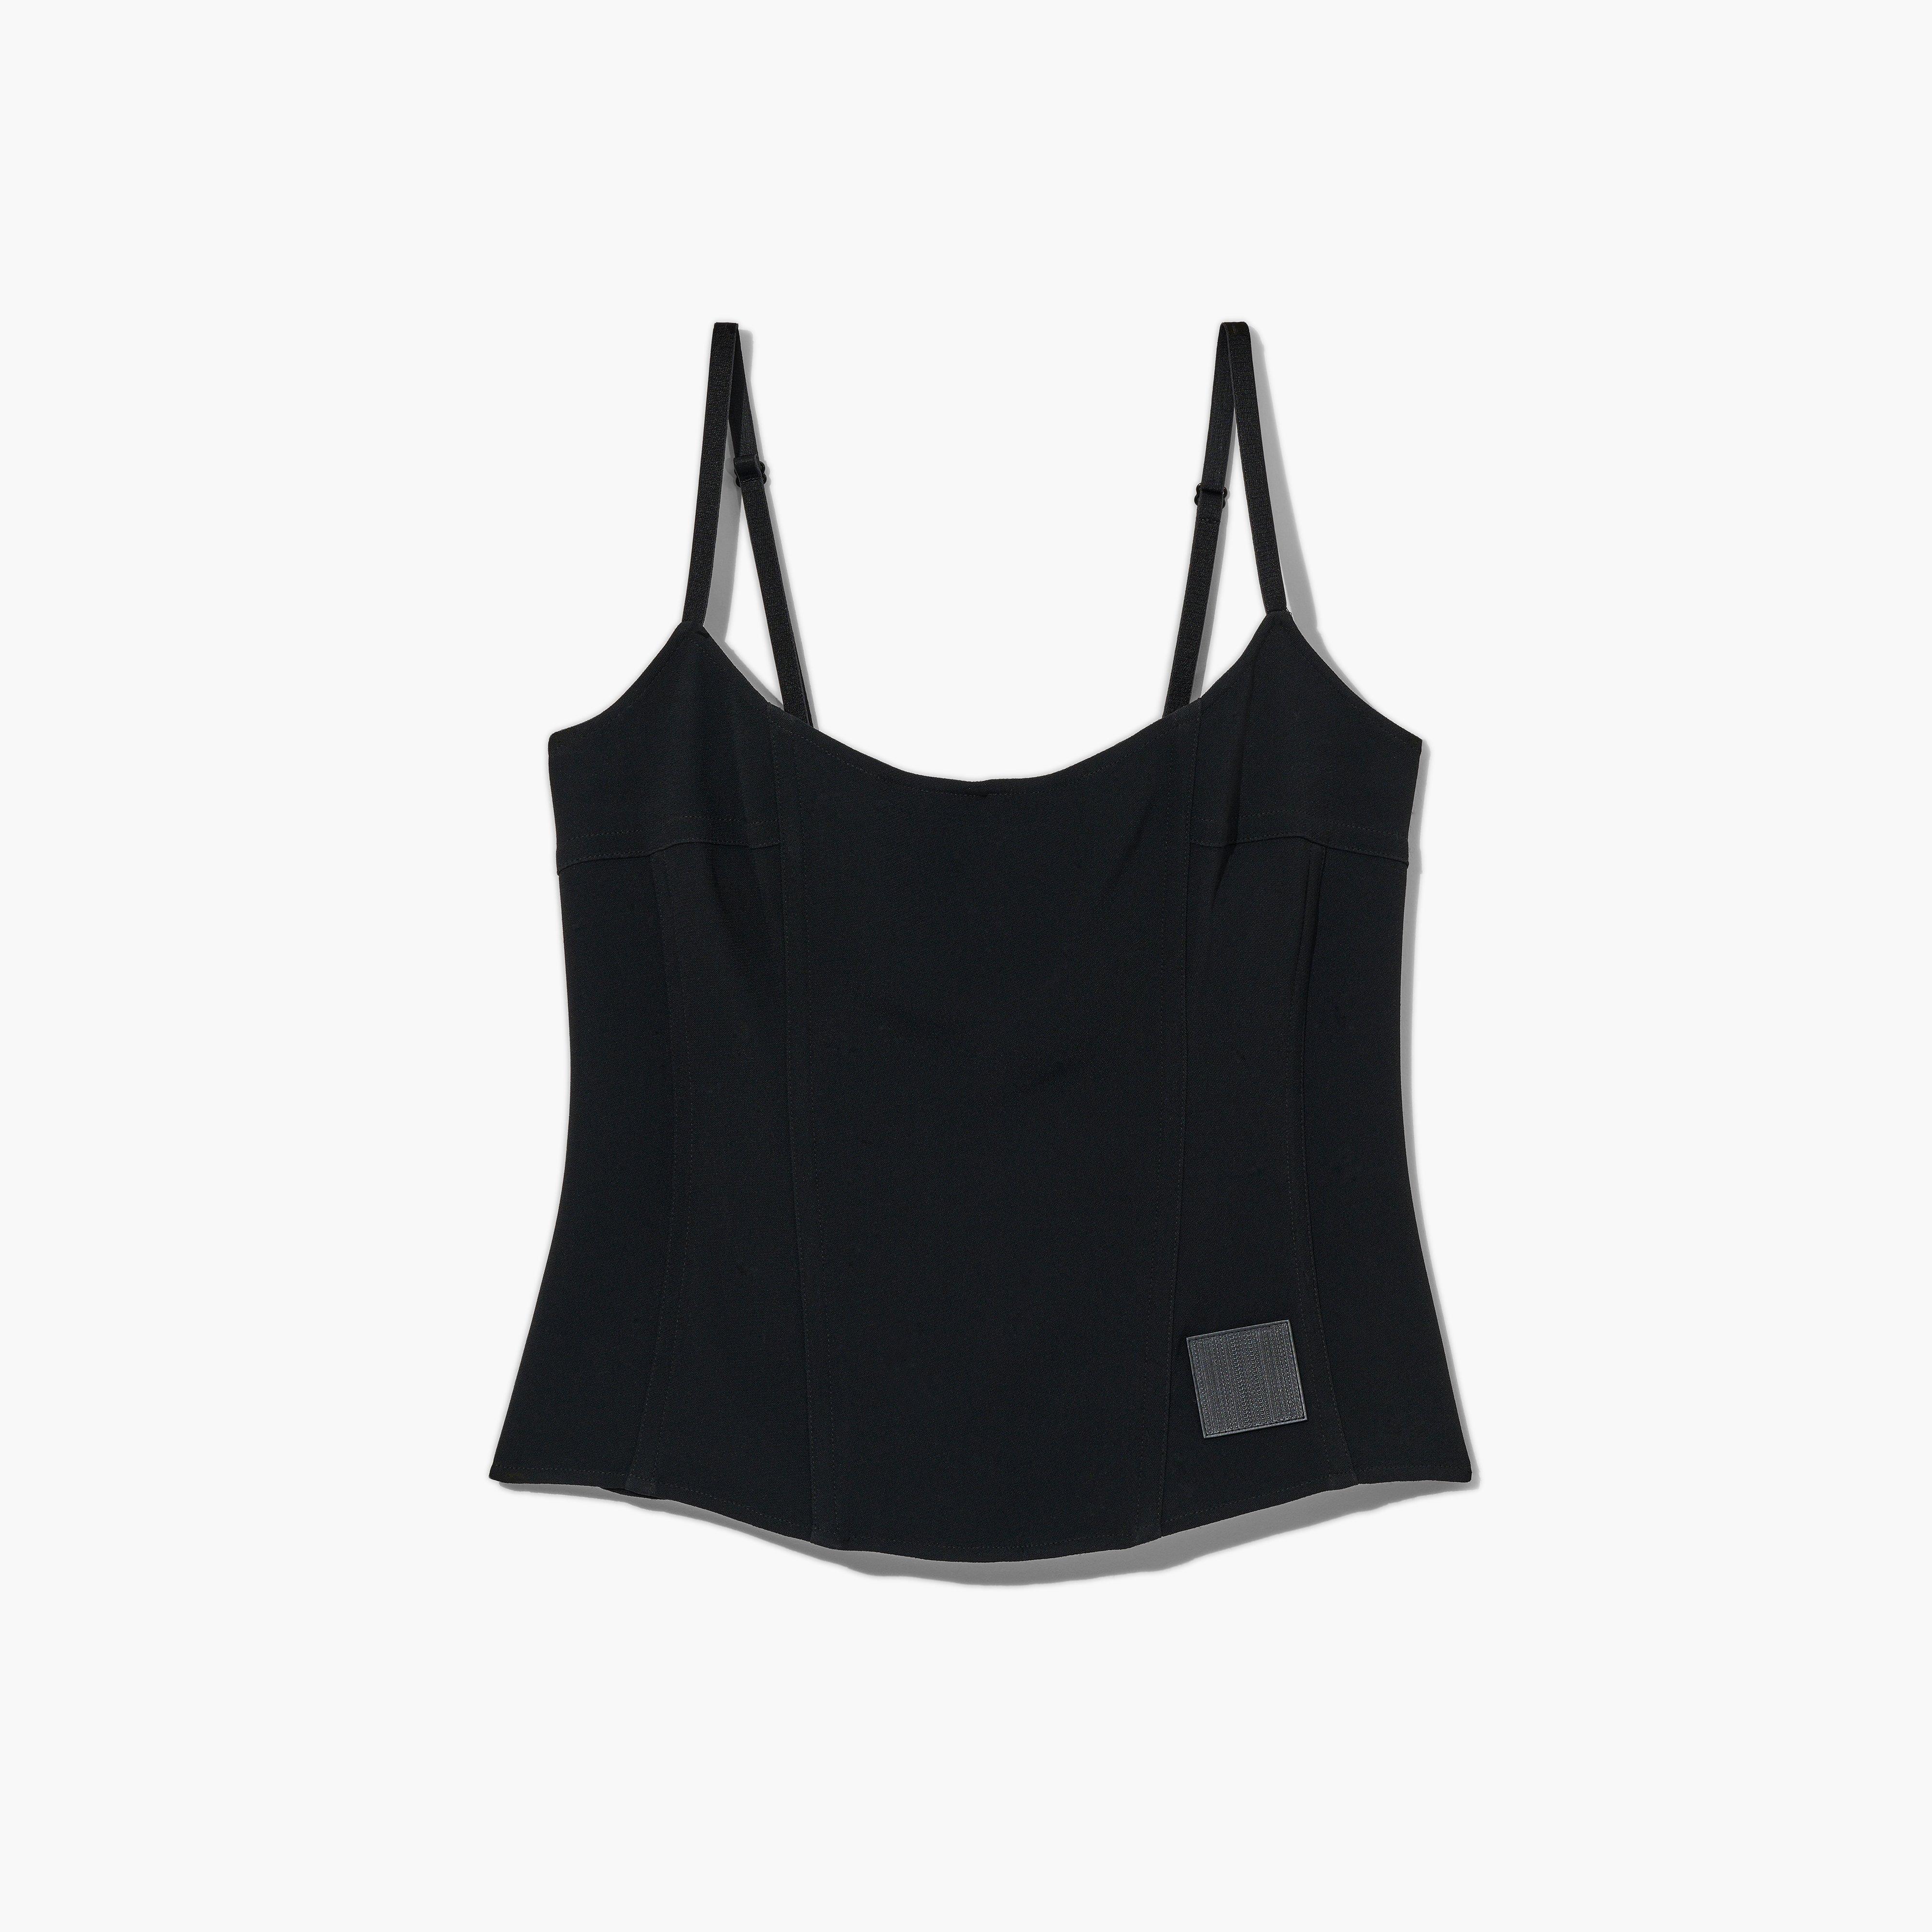 Marc by Marc jacobs The Structured Camisole,BLACK